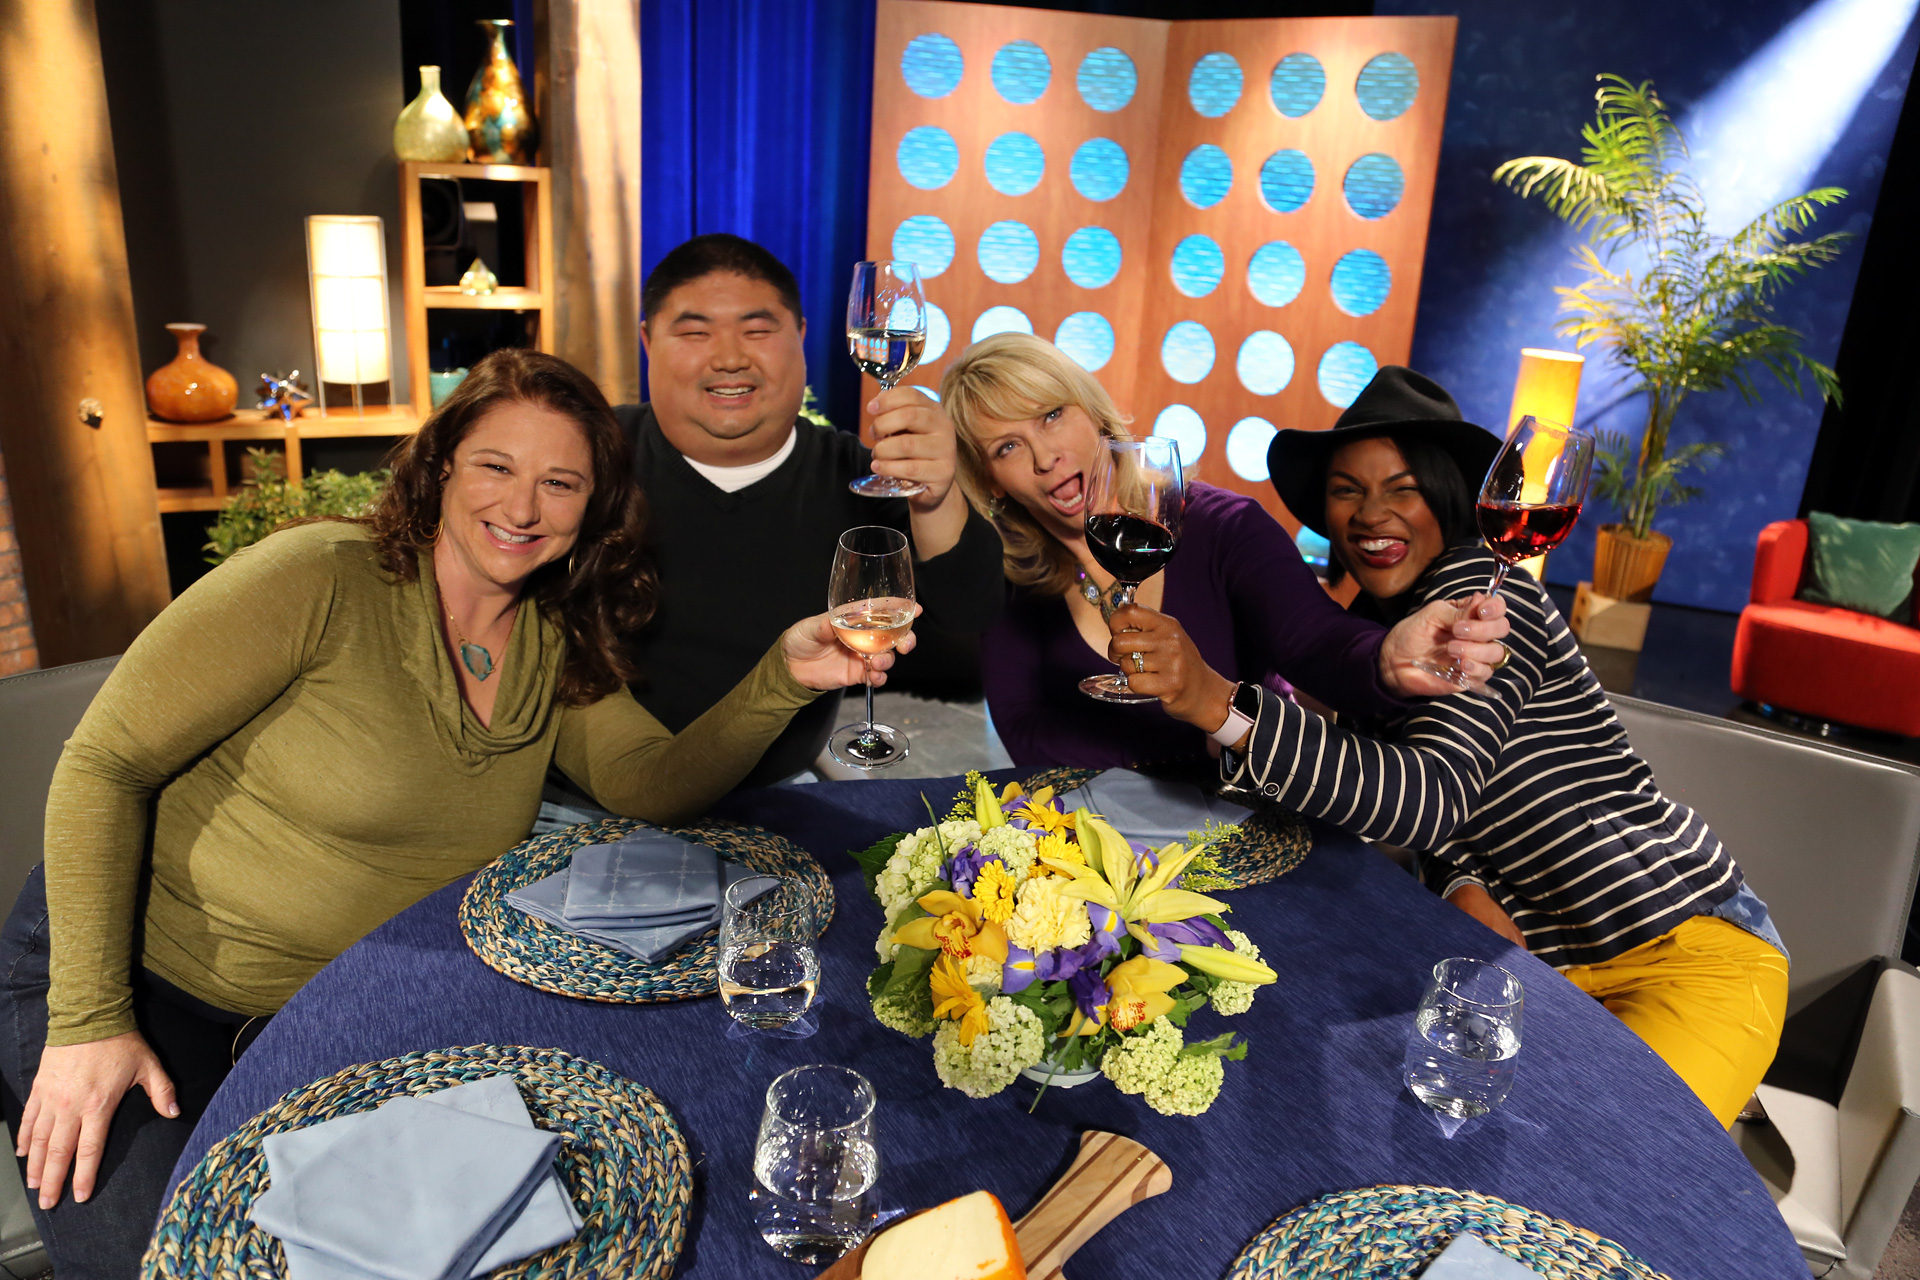 Host Leslie Sbrocco and guests having fun on the set of the episode 15 of season 11.